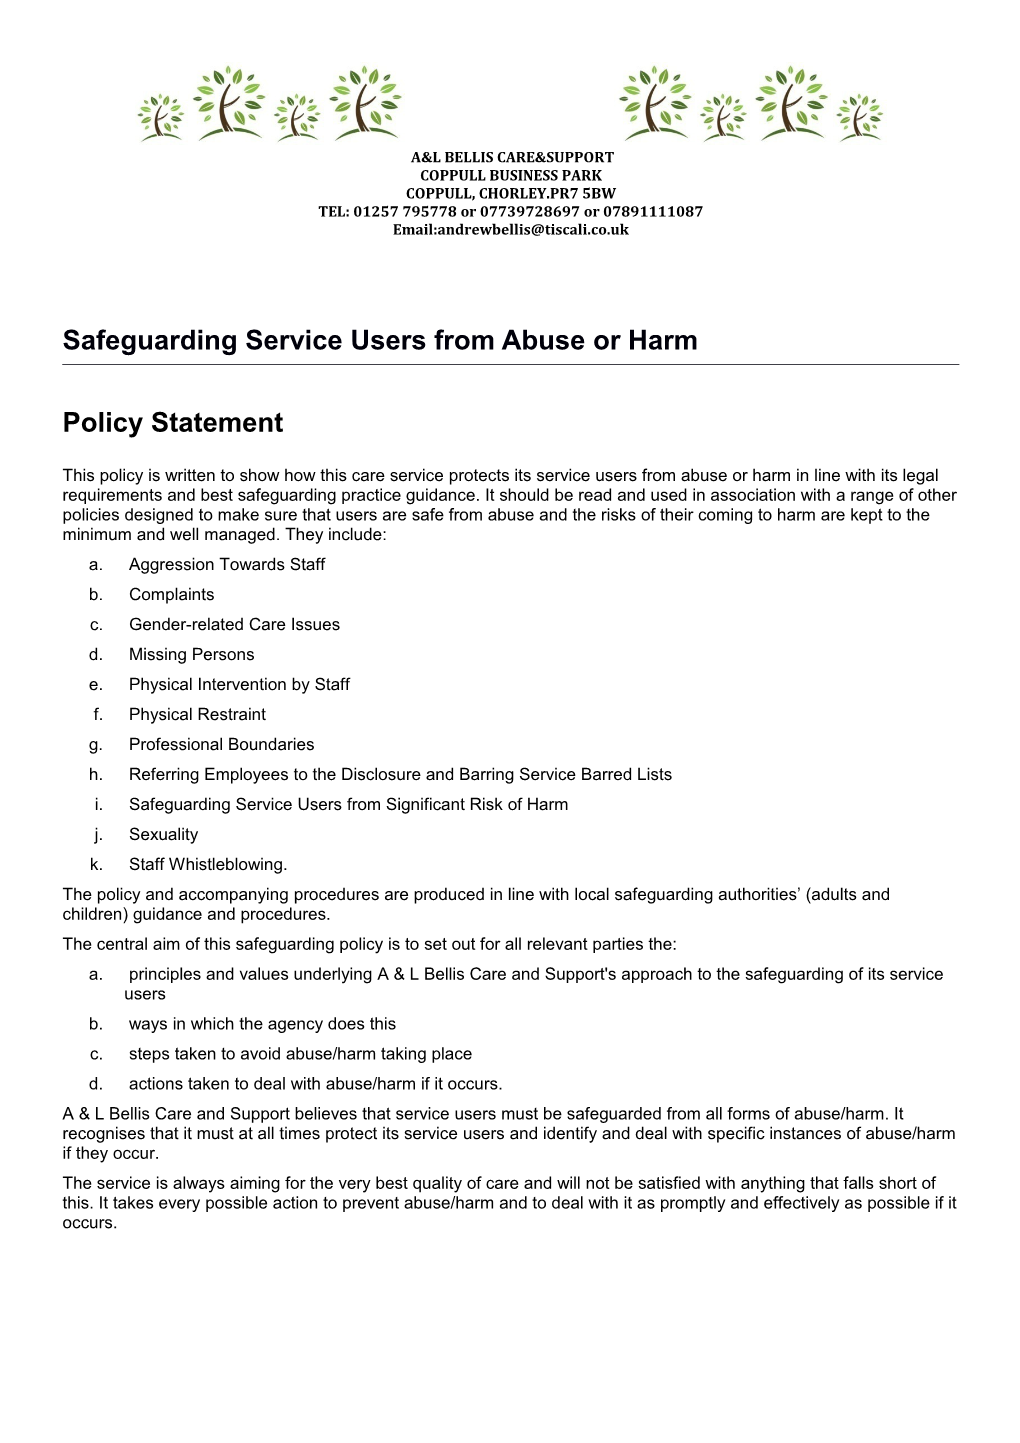 Safeguarding Service Users from Abuse Or Harm